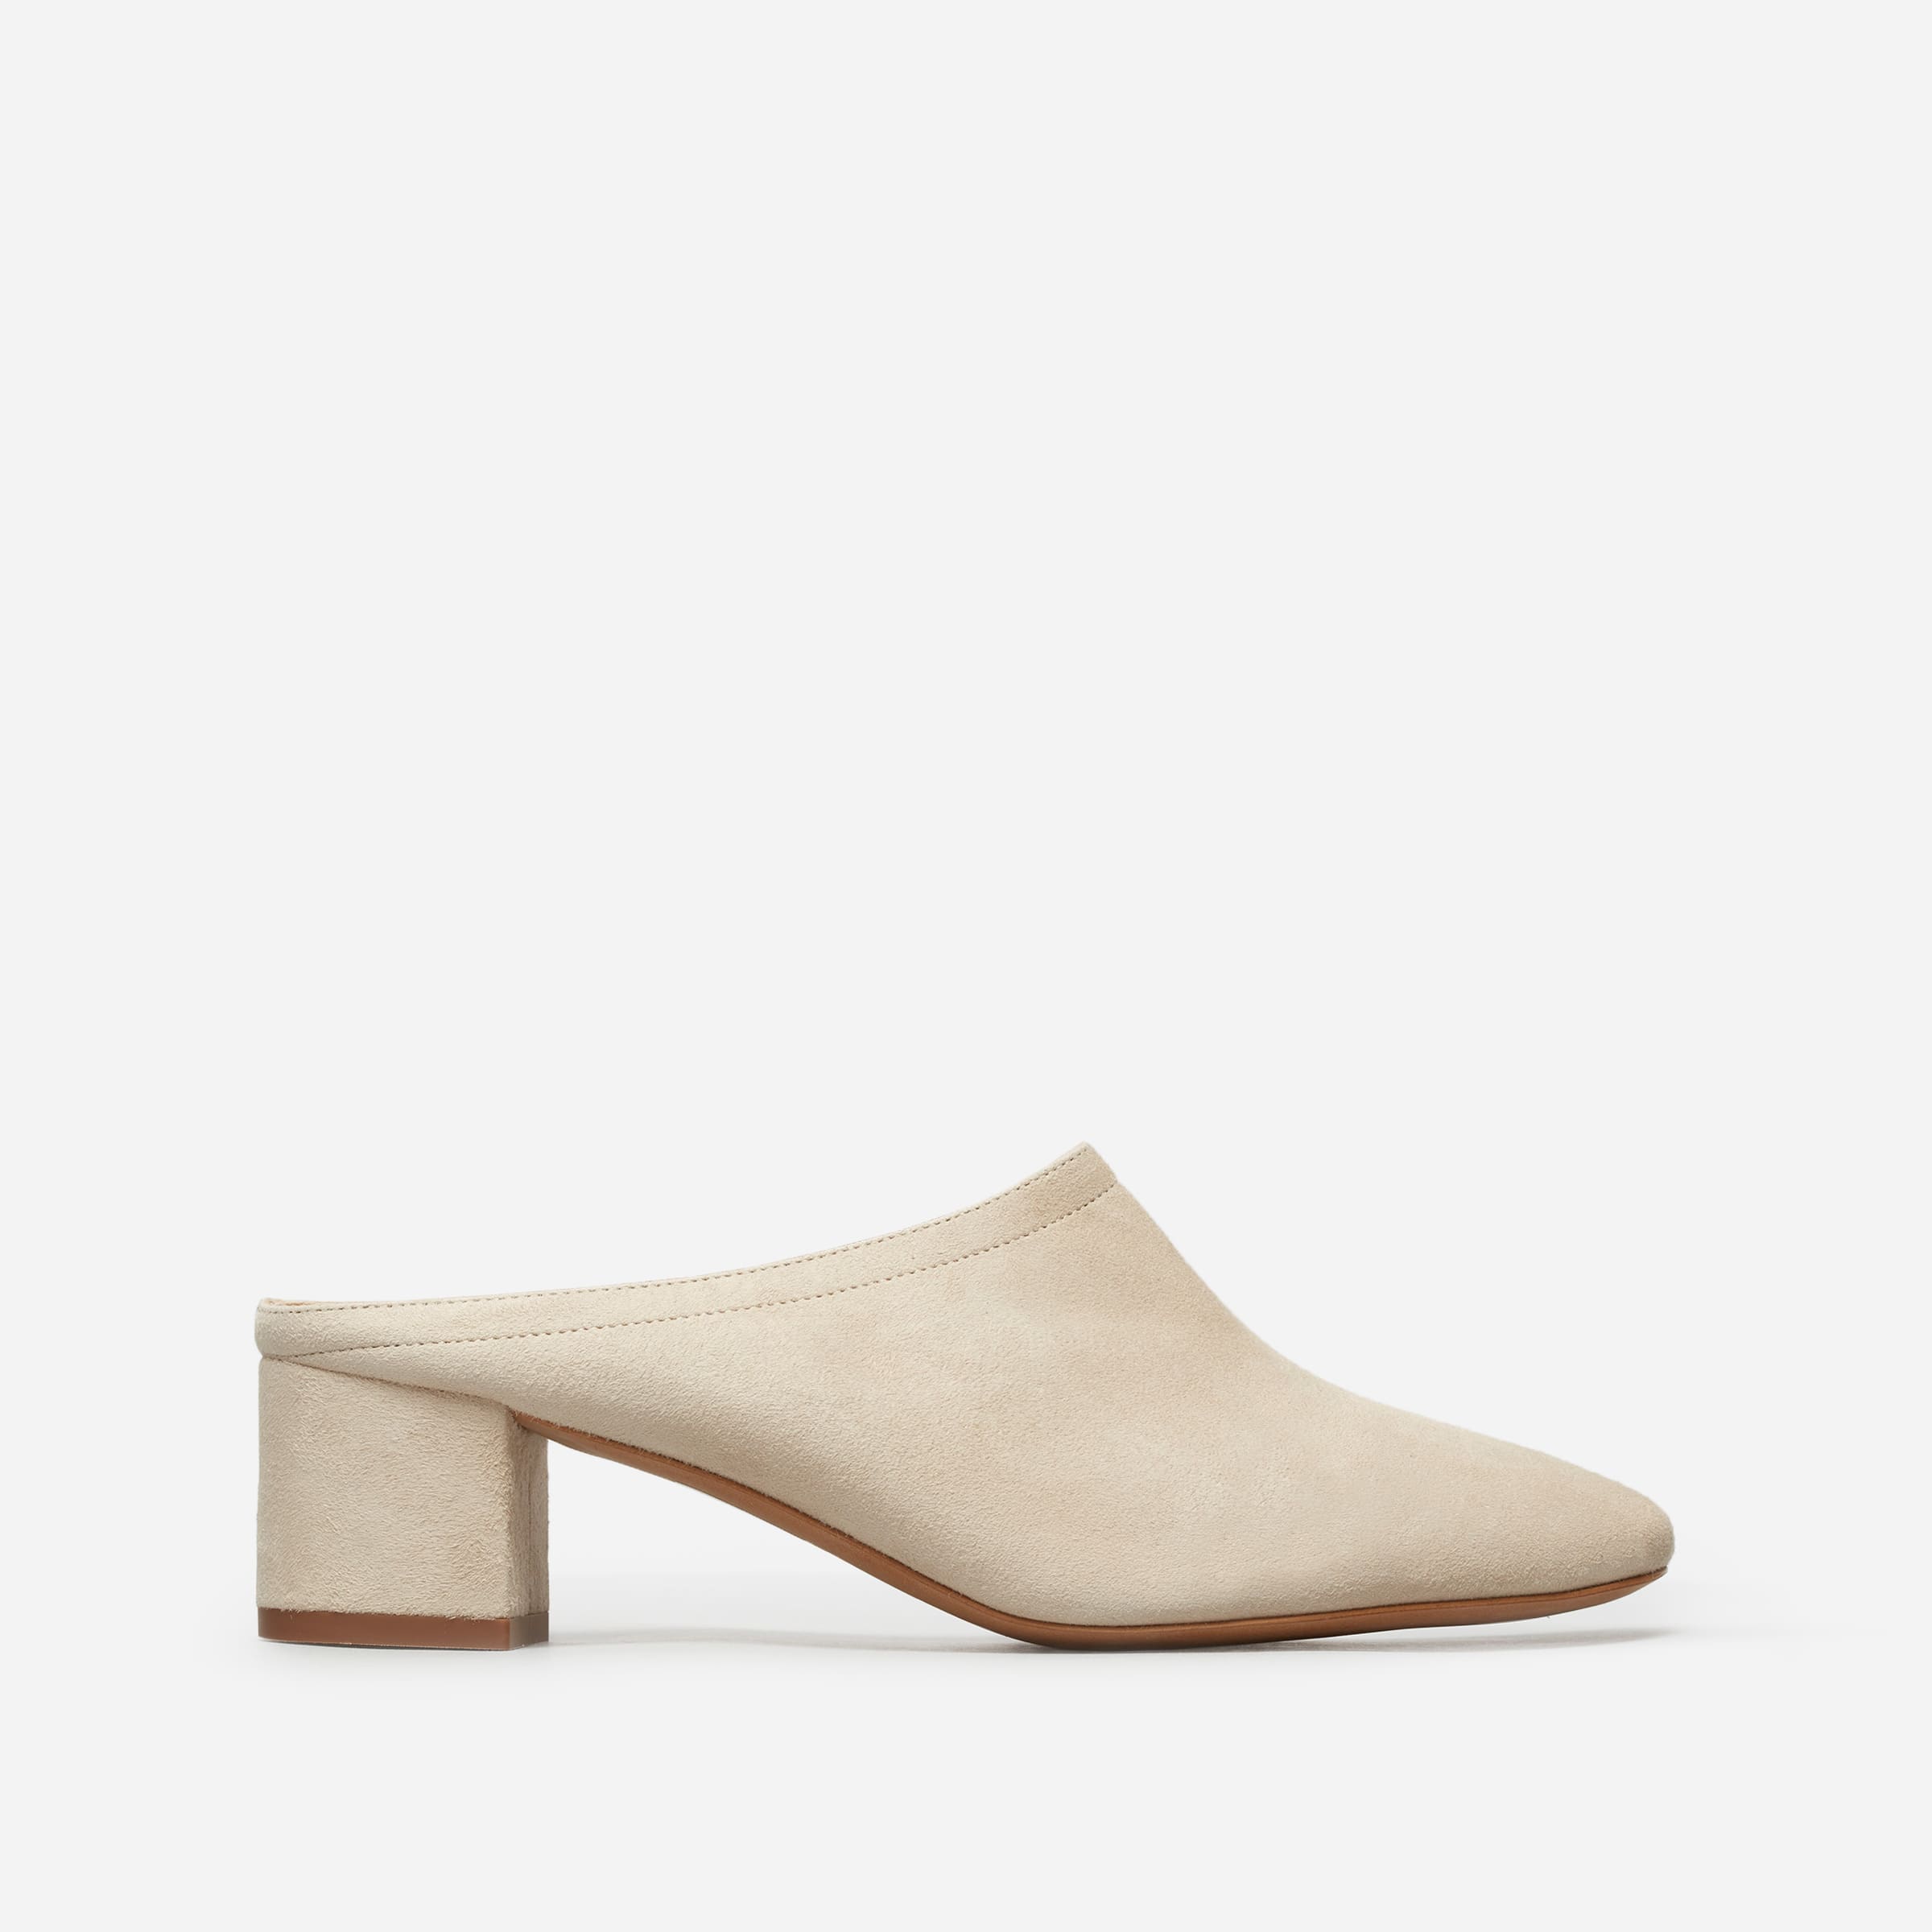 The Day Heel Mule Natural Suede – Everlane